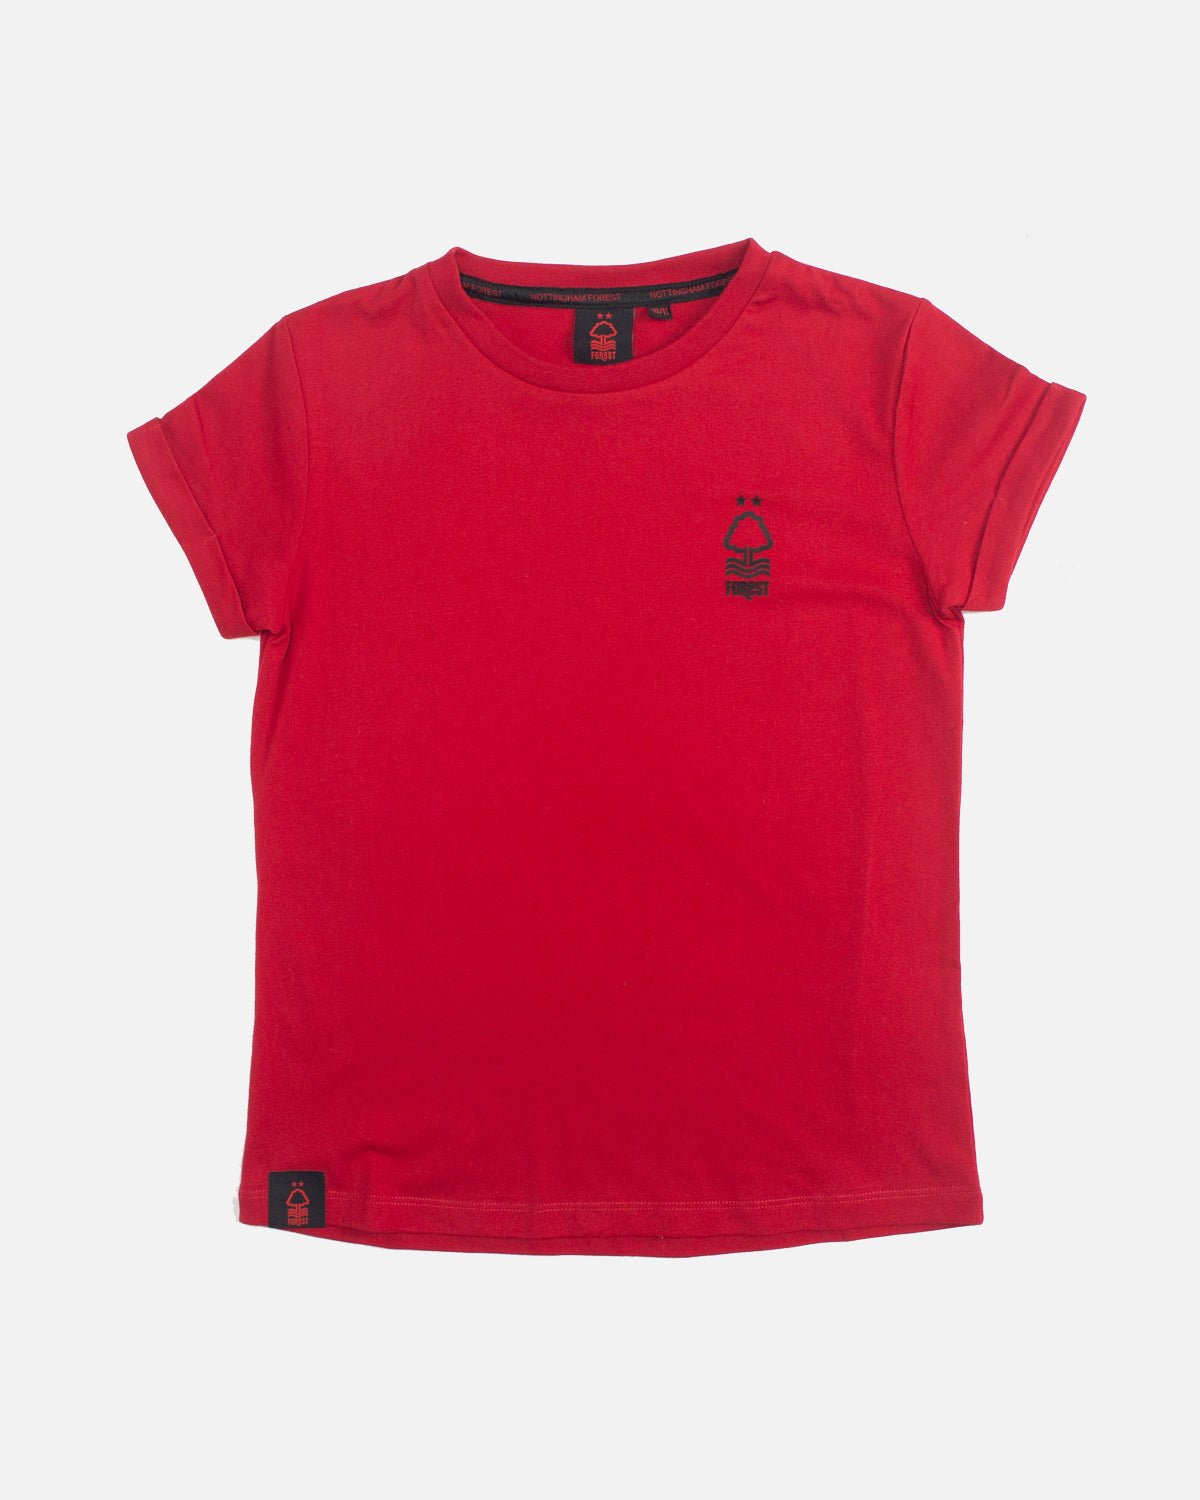 NFFC Girls Red Essential Crew Neck T-Shirt - Nottingham Forest FC